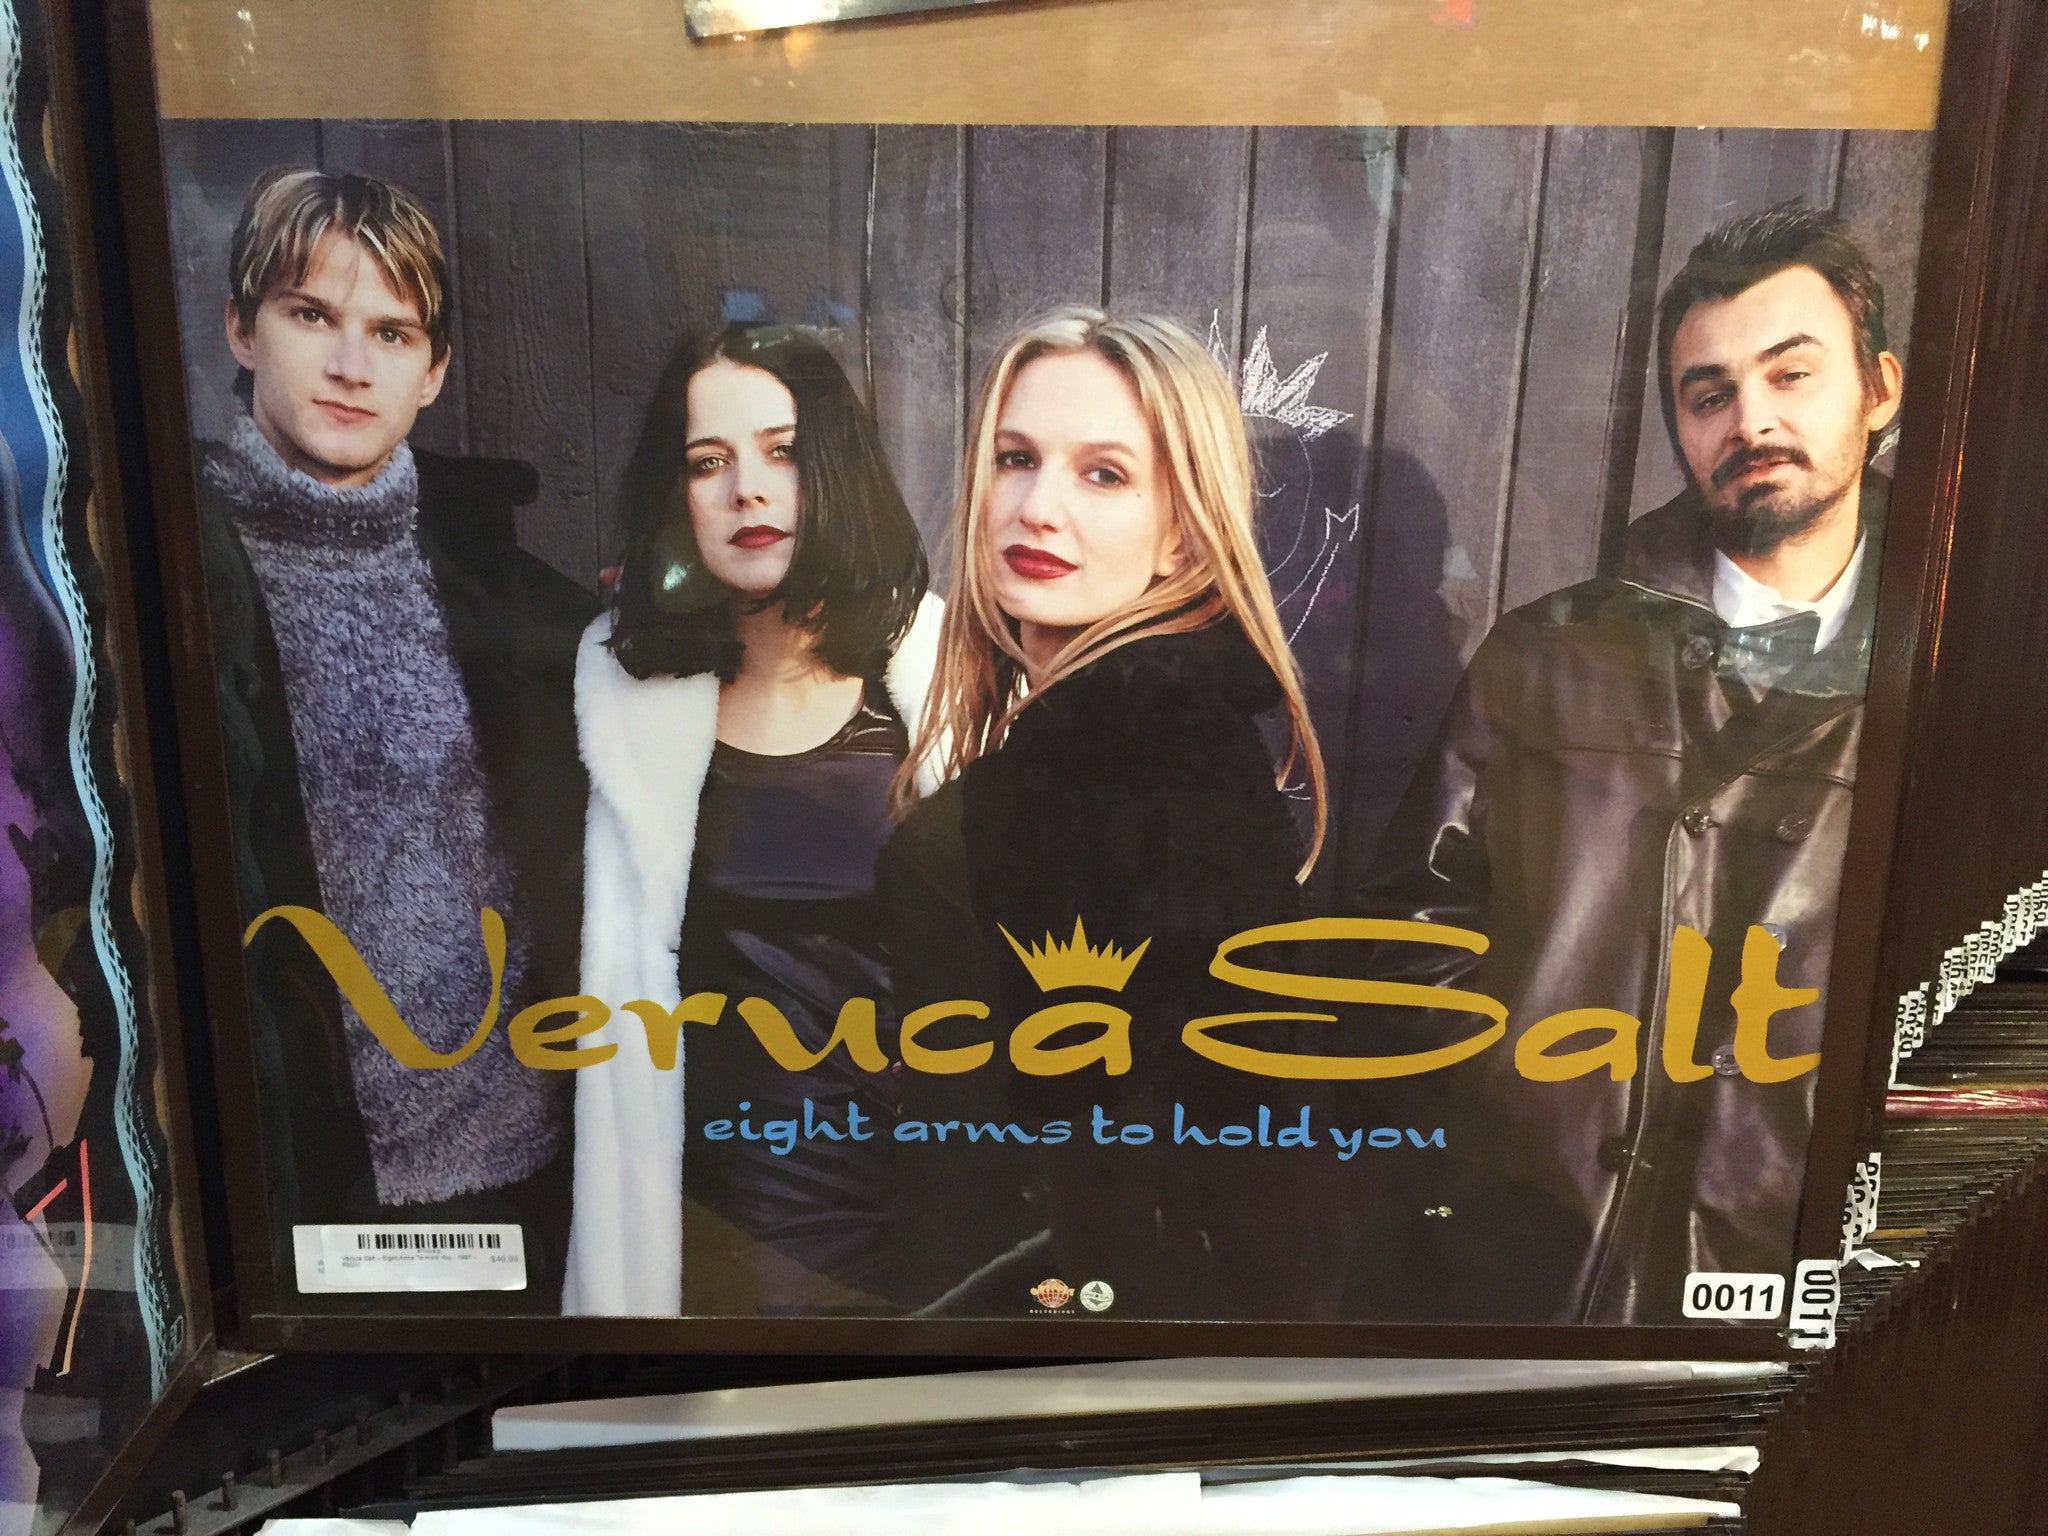 Veruca Salt ‎– Eight Arms To Hold You - 1997 - P0186